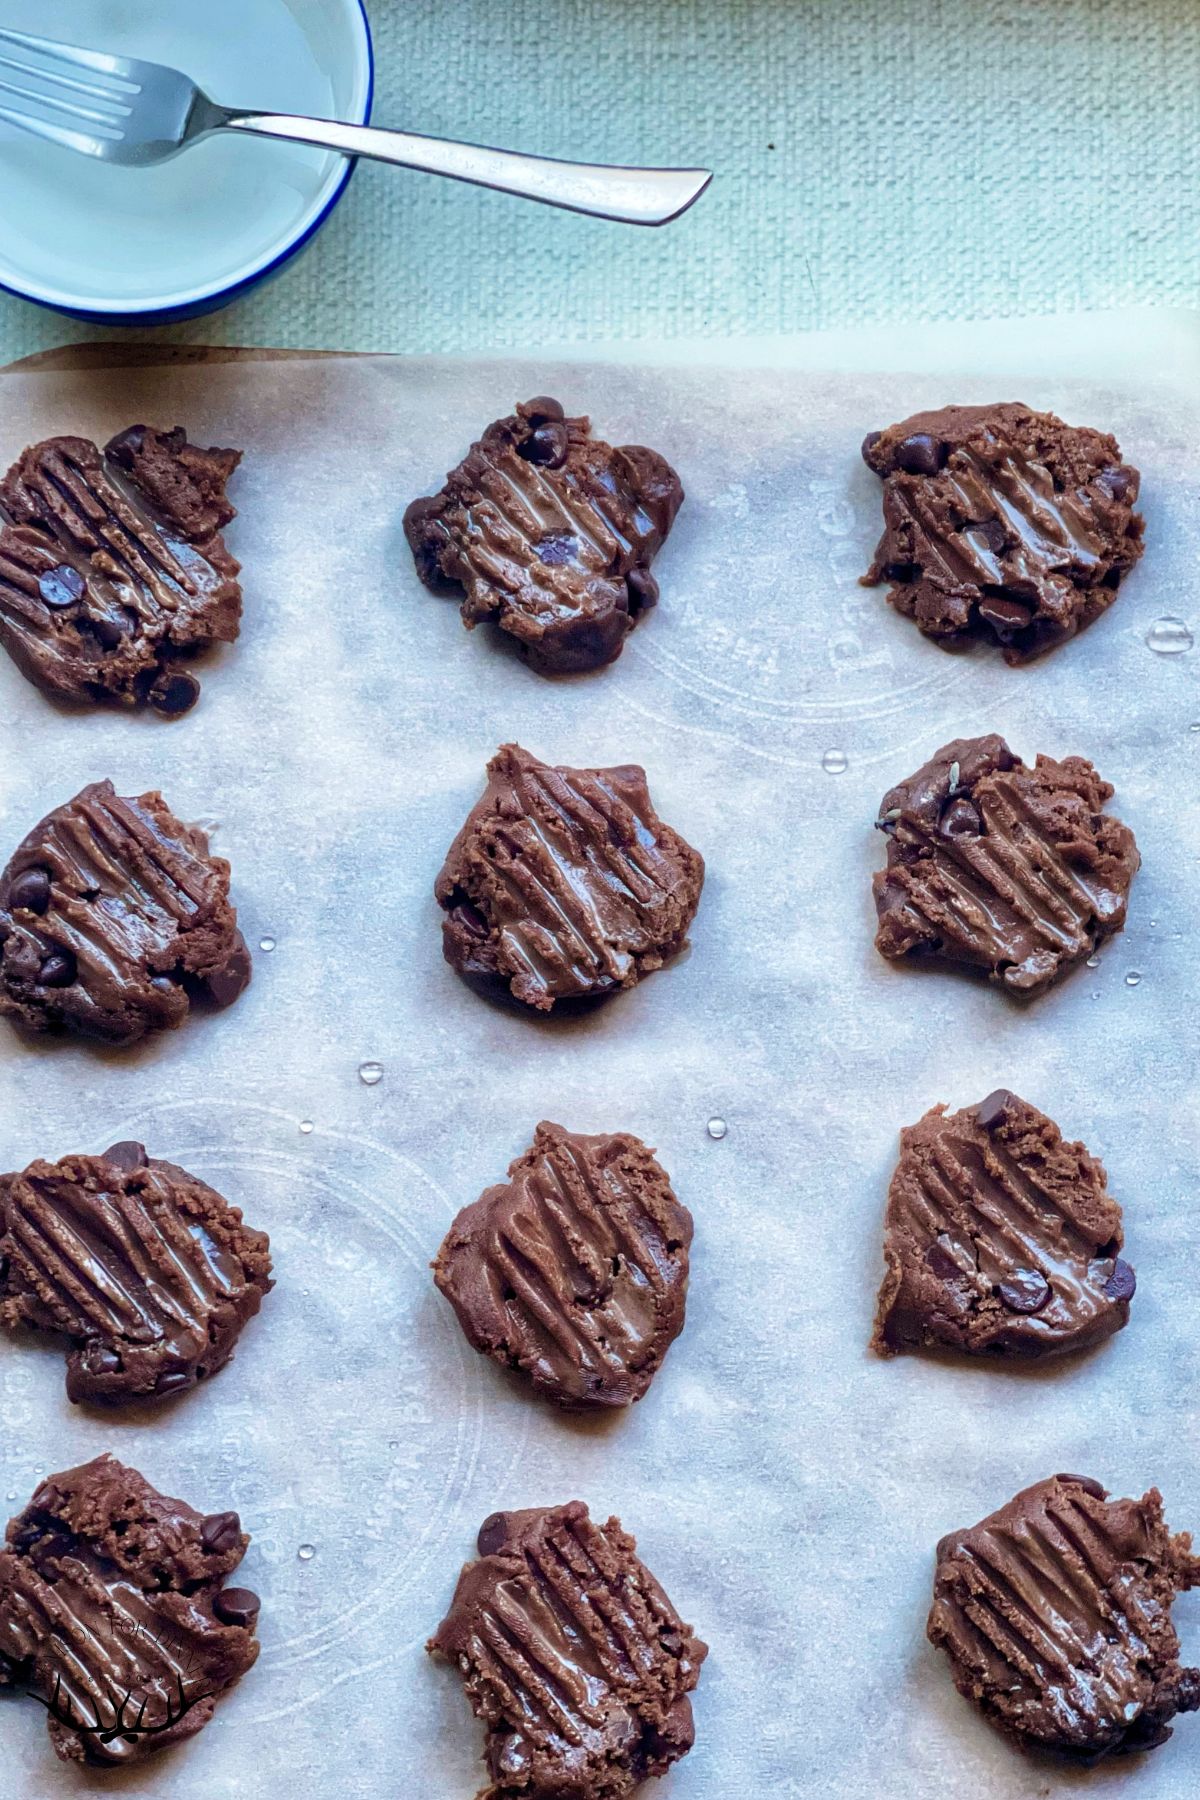 Pressed vegan cookies on parchment paper.